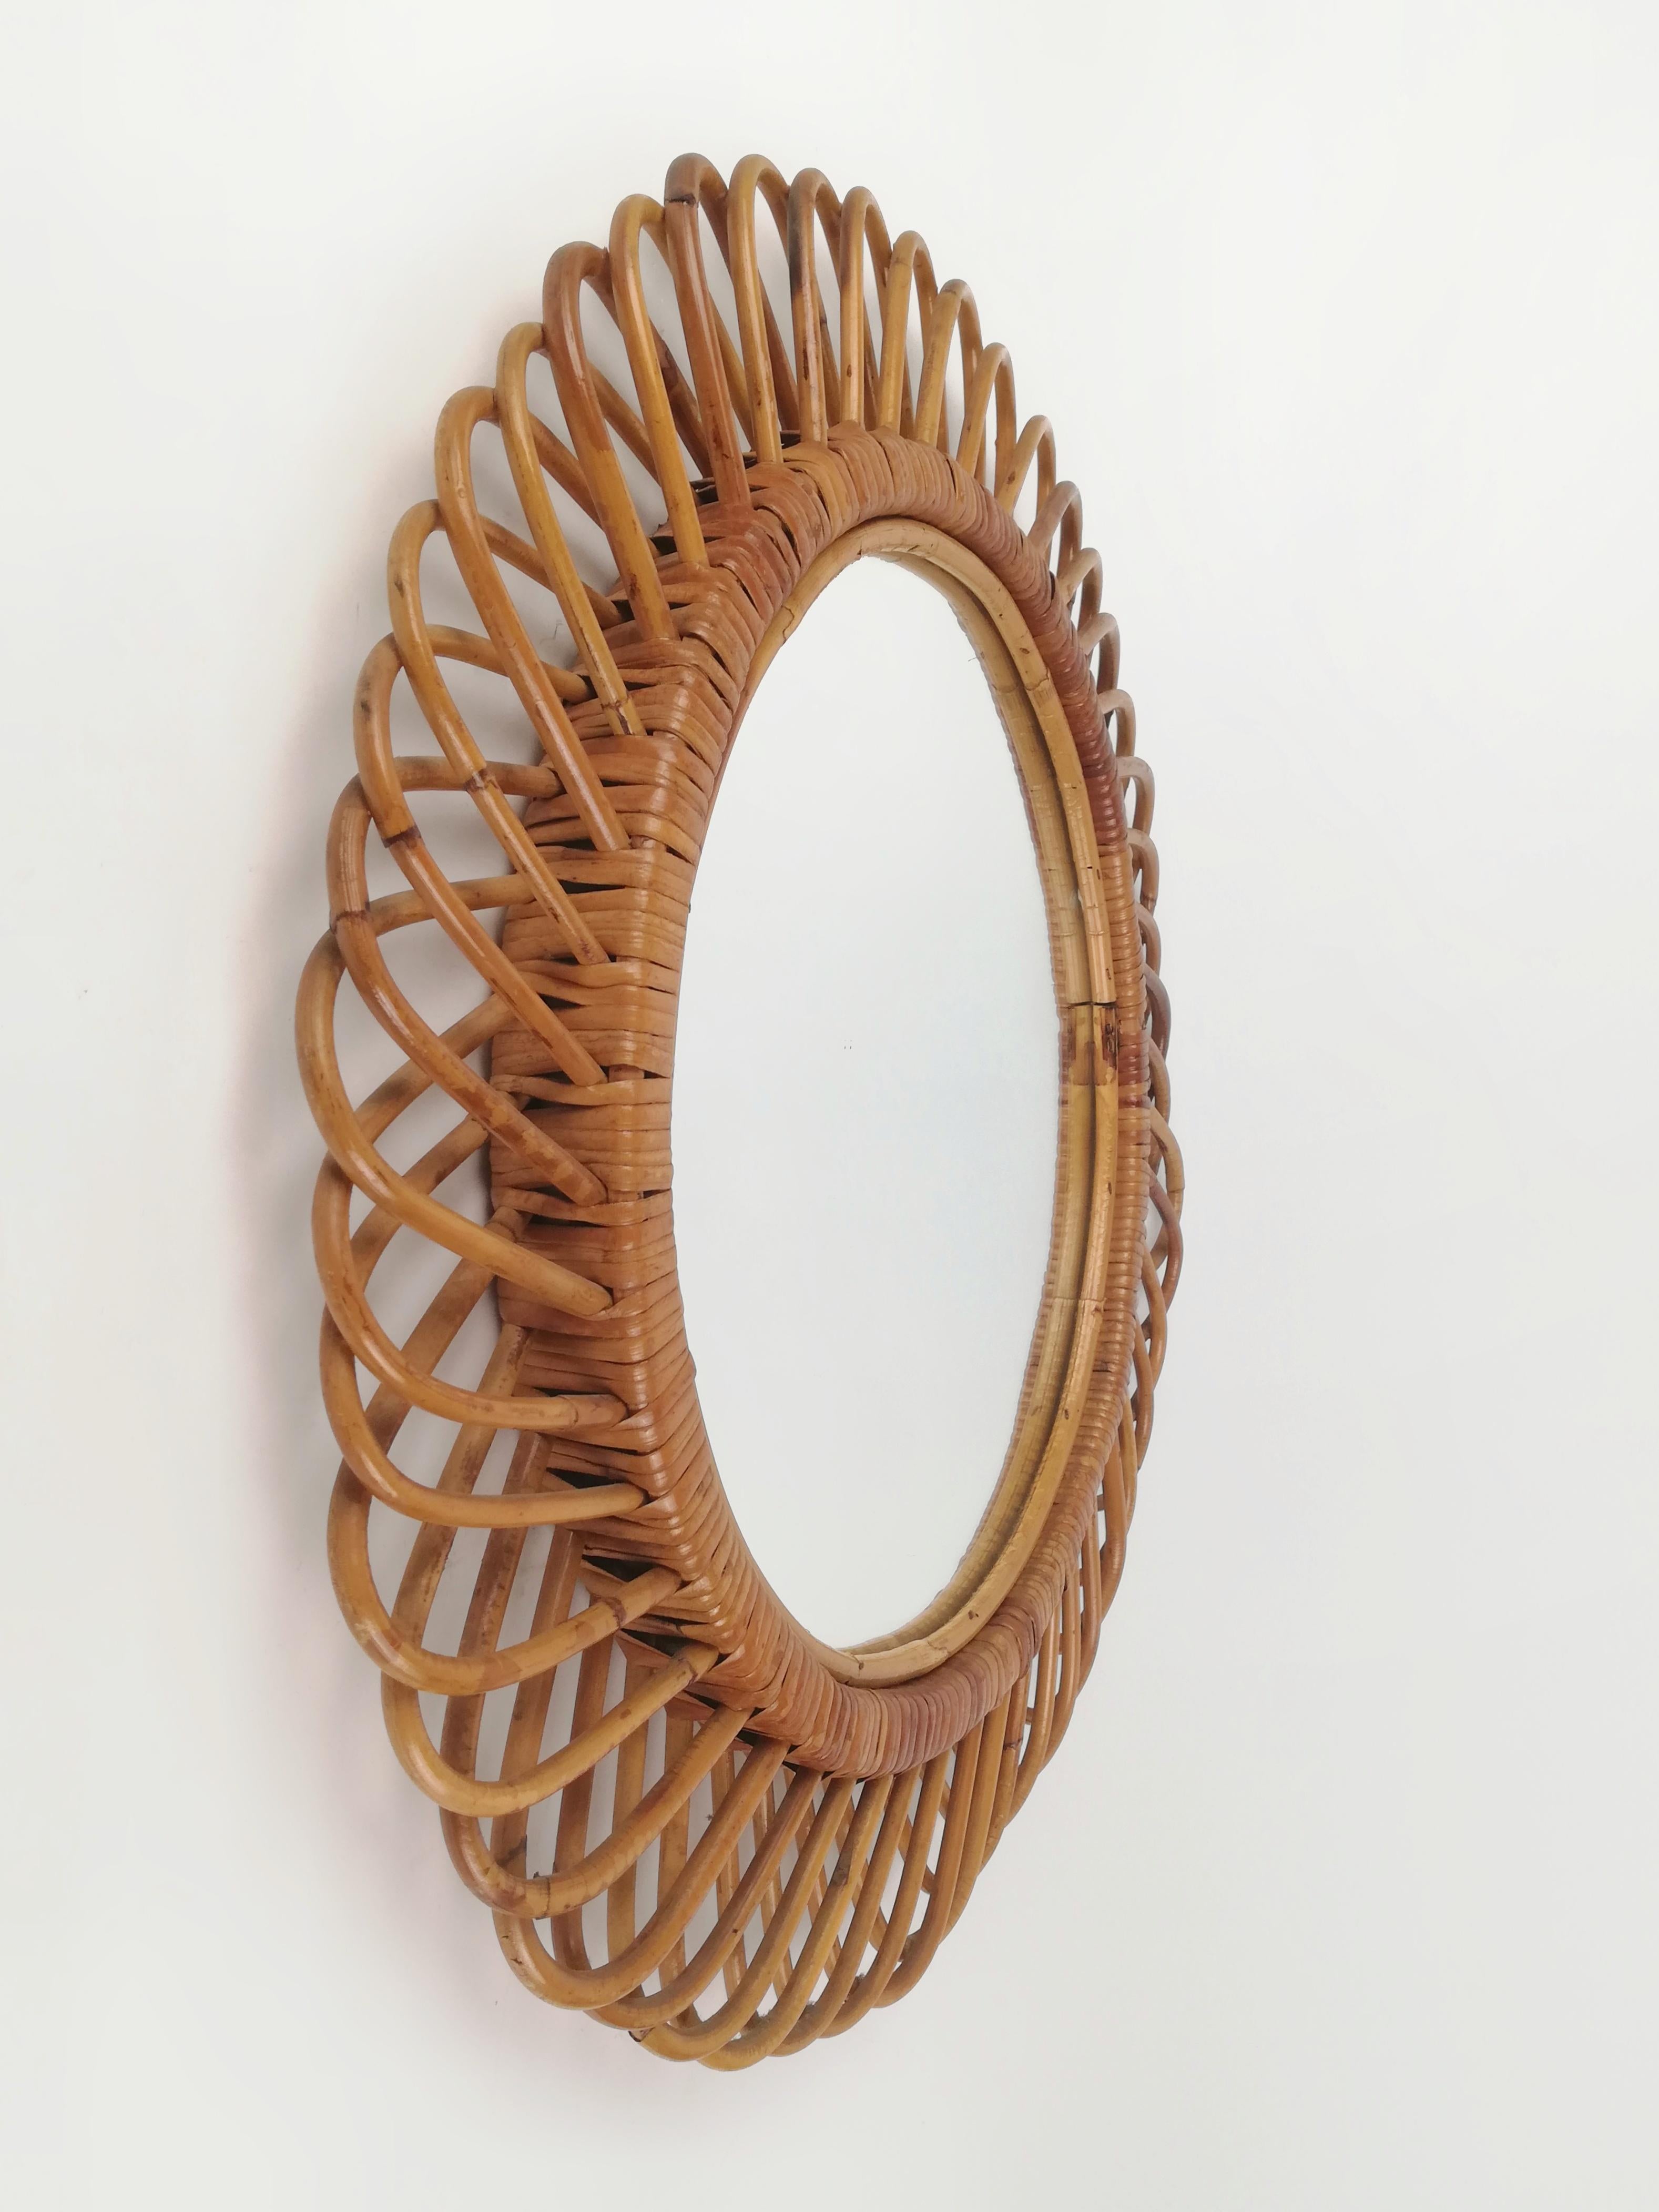 Circular mirror handcrafted in Italy during the 1960s
The craftsmen who made it flexed canes and fixed them with rattan for giving it this radial shape.
The style in which it is made makes it attributable to the Bonacina production, the most